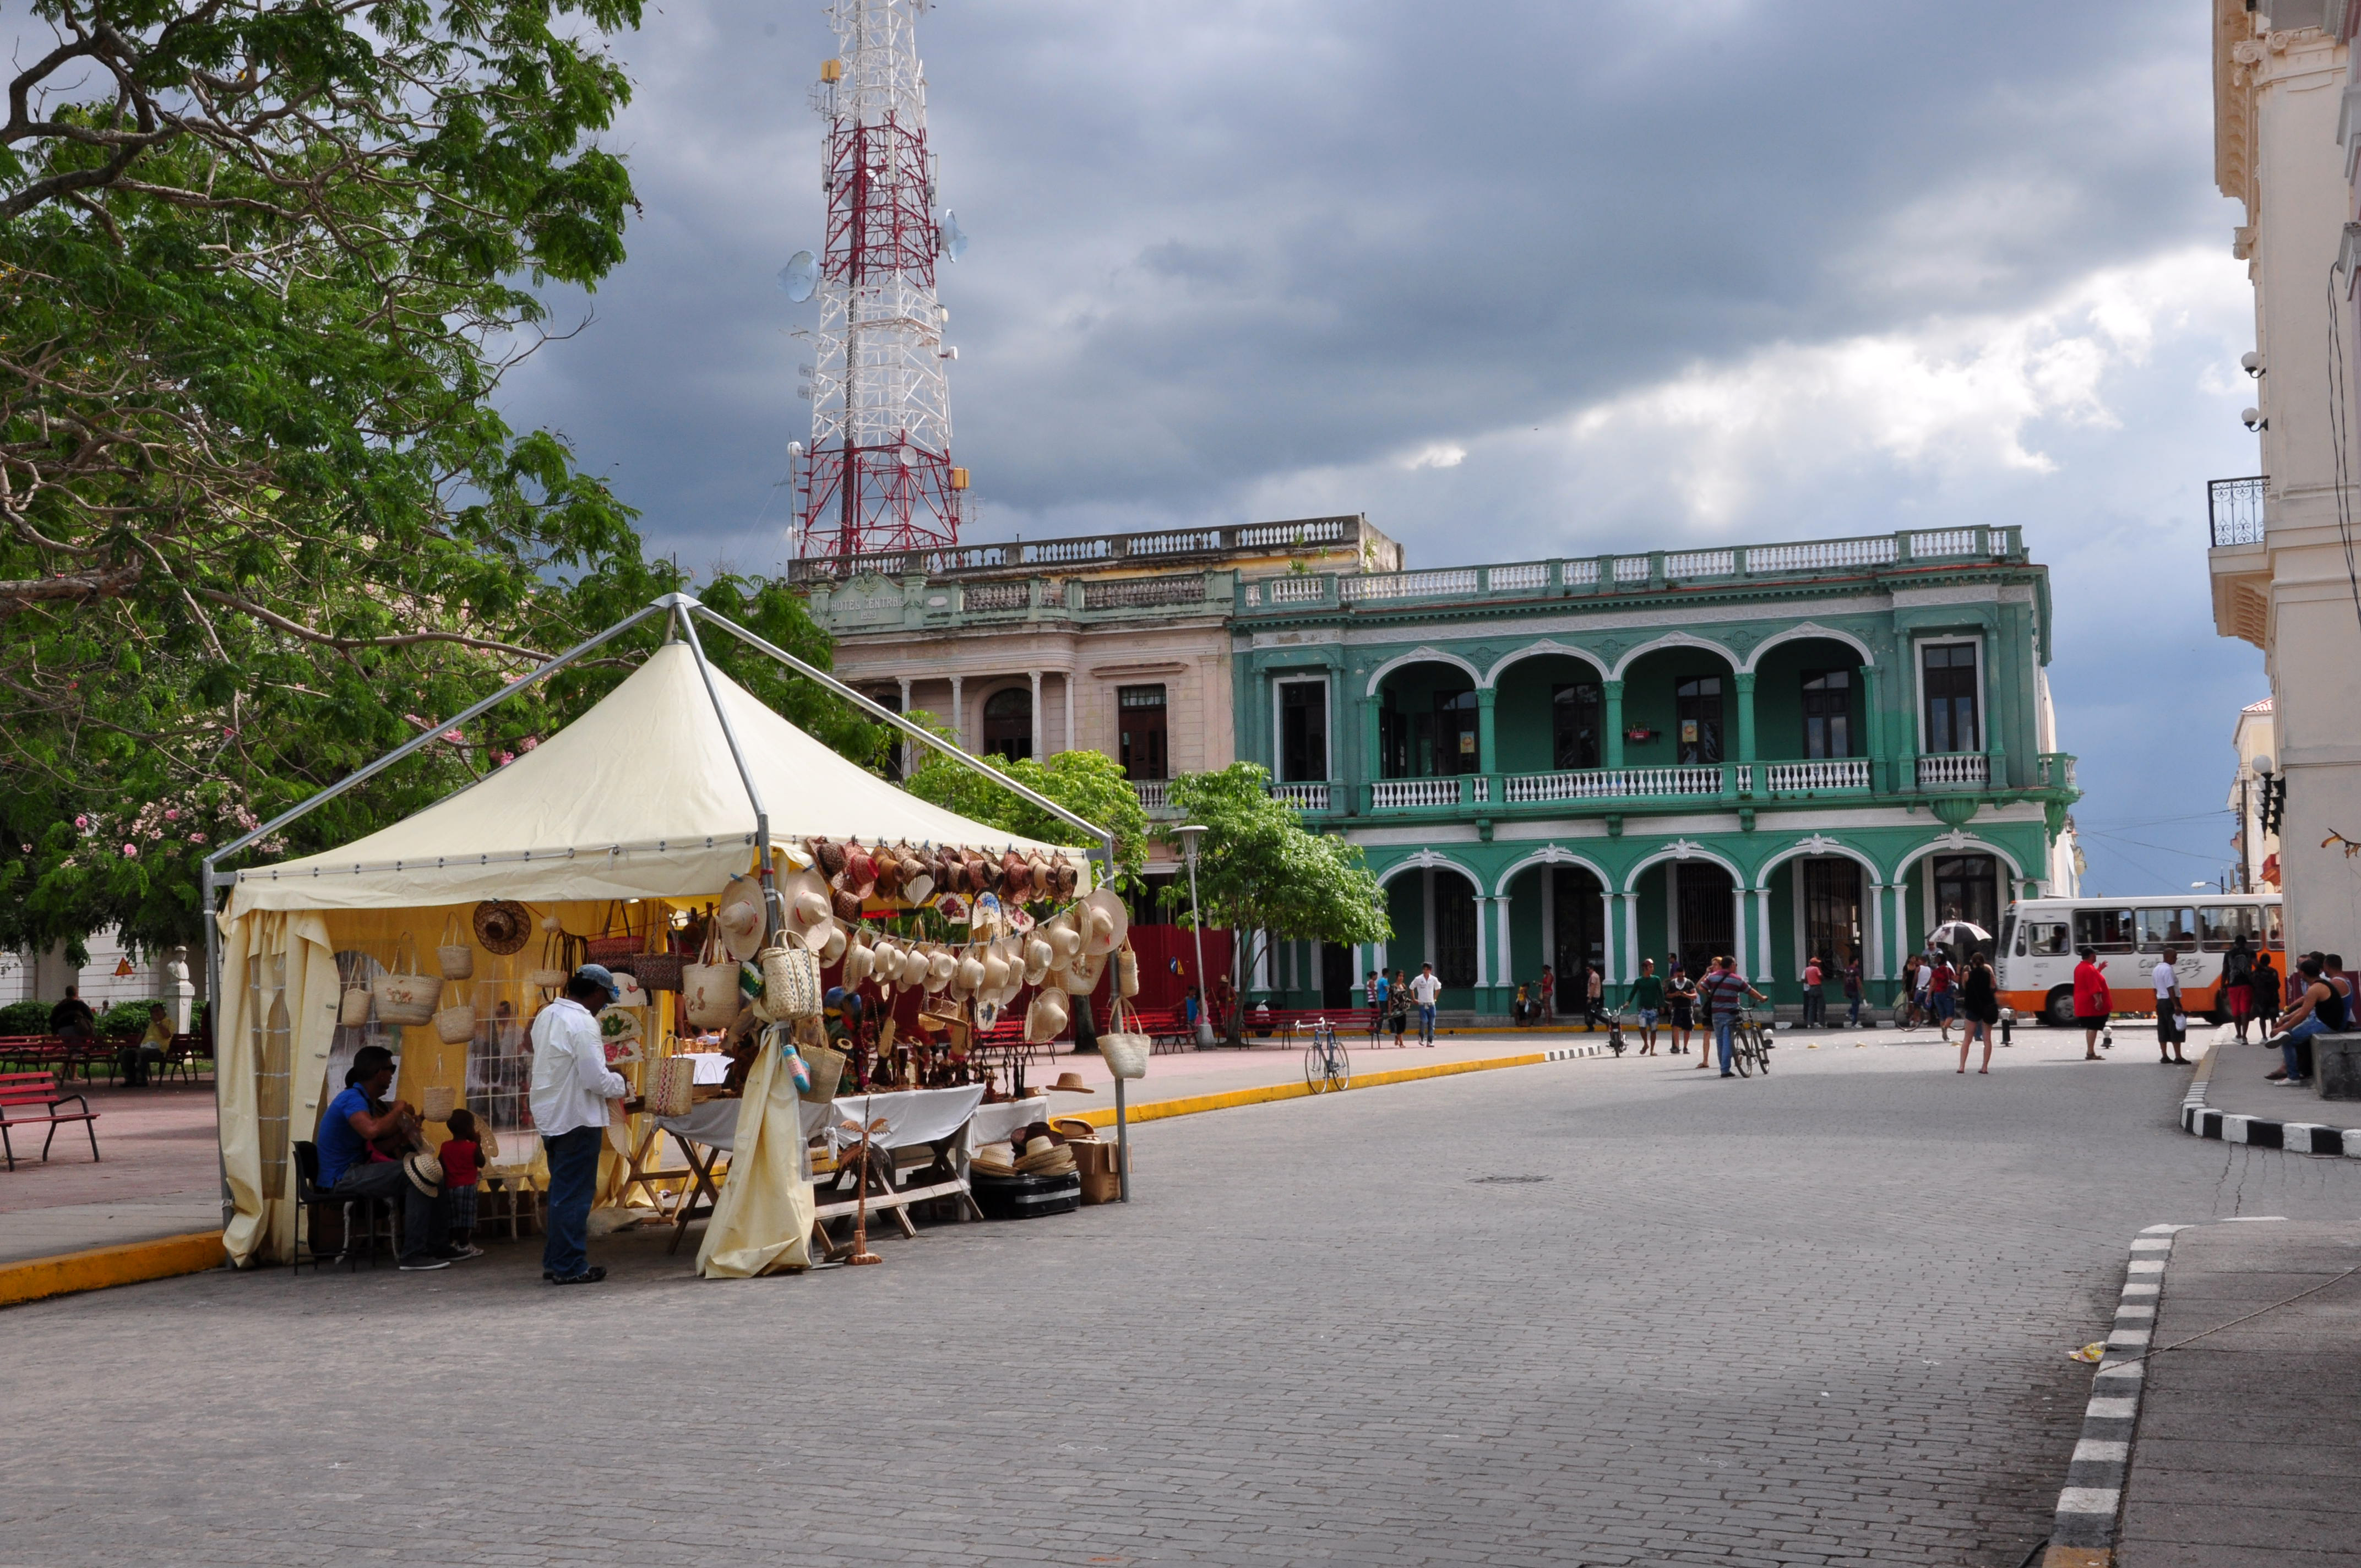 A craft store in Parque Vidal located in the centre of Santa Clara, Cuba. Photo taken by a photographer Carolina Vilches.